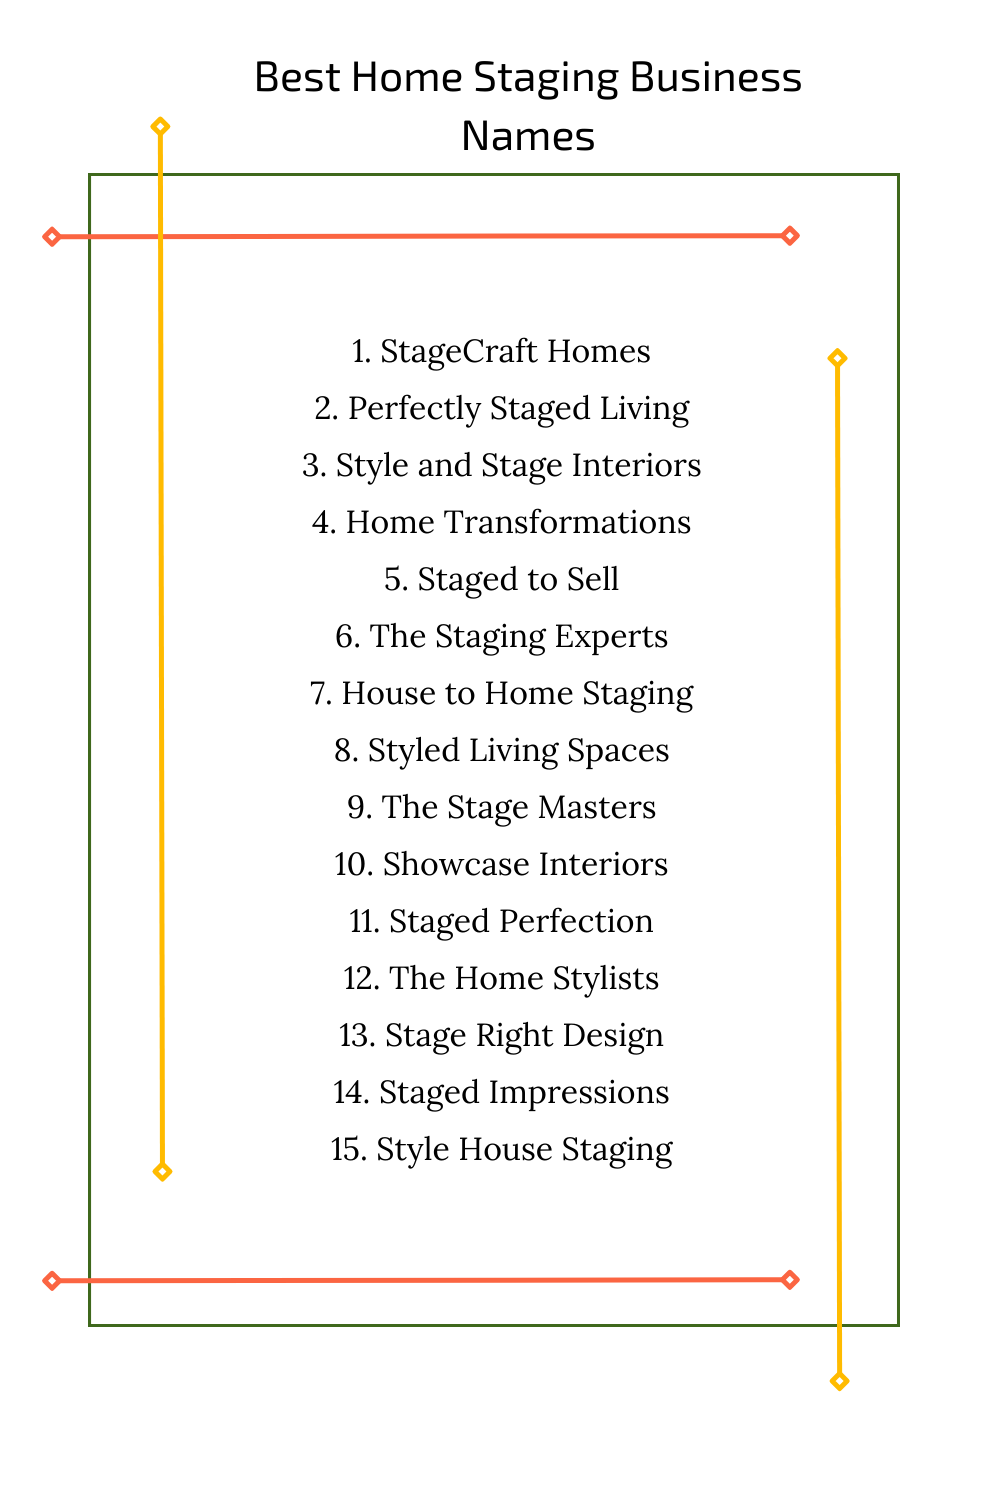 Best Home Staging Business Names